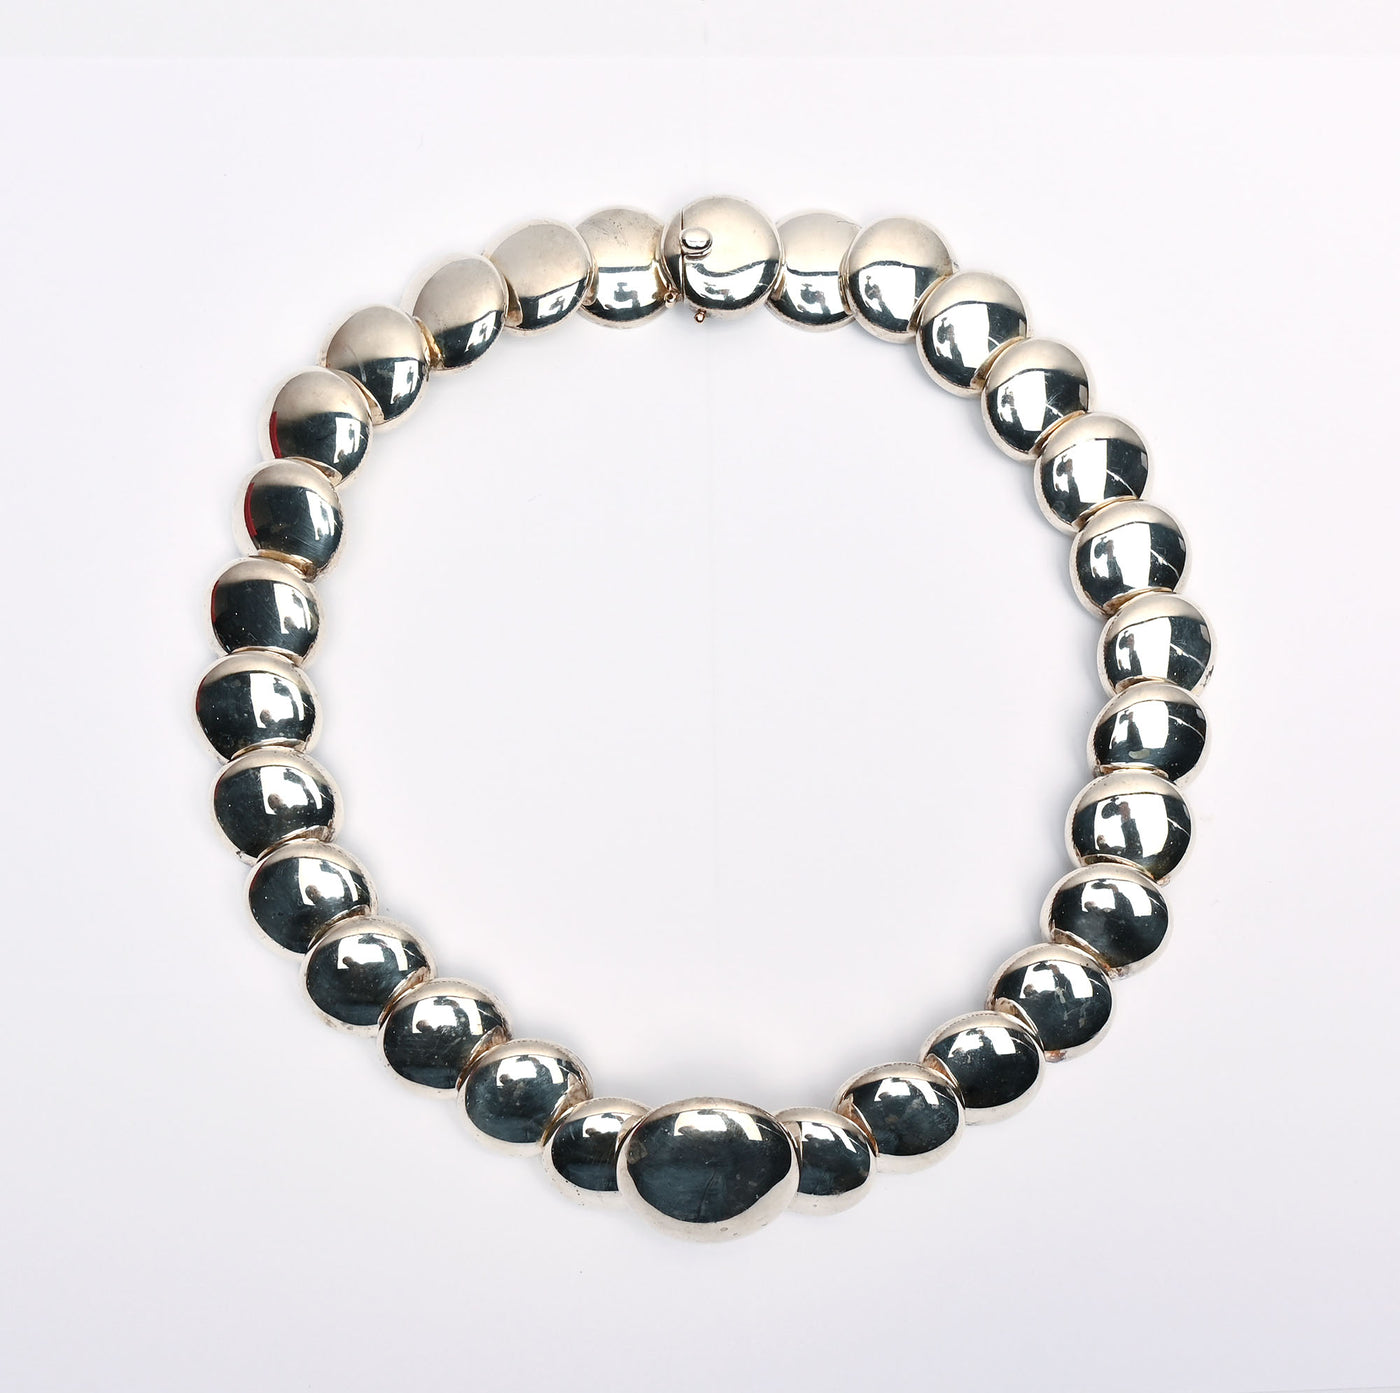 Tane Sterling Silver Choker Necklace